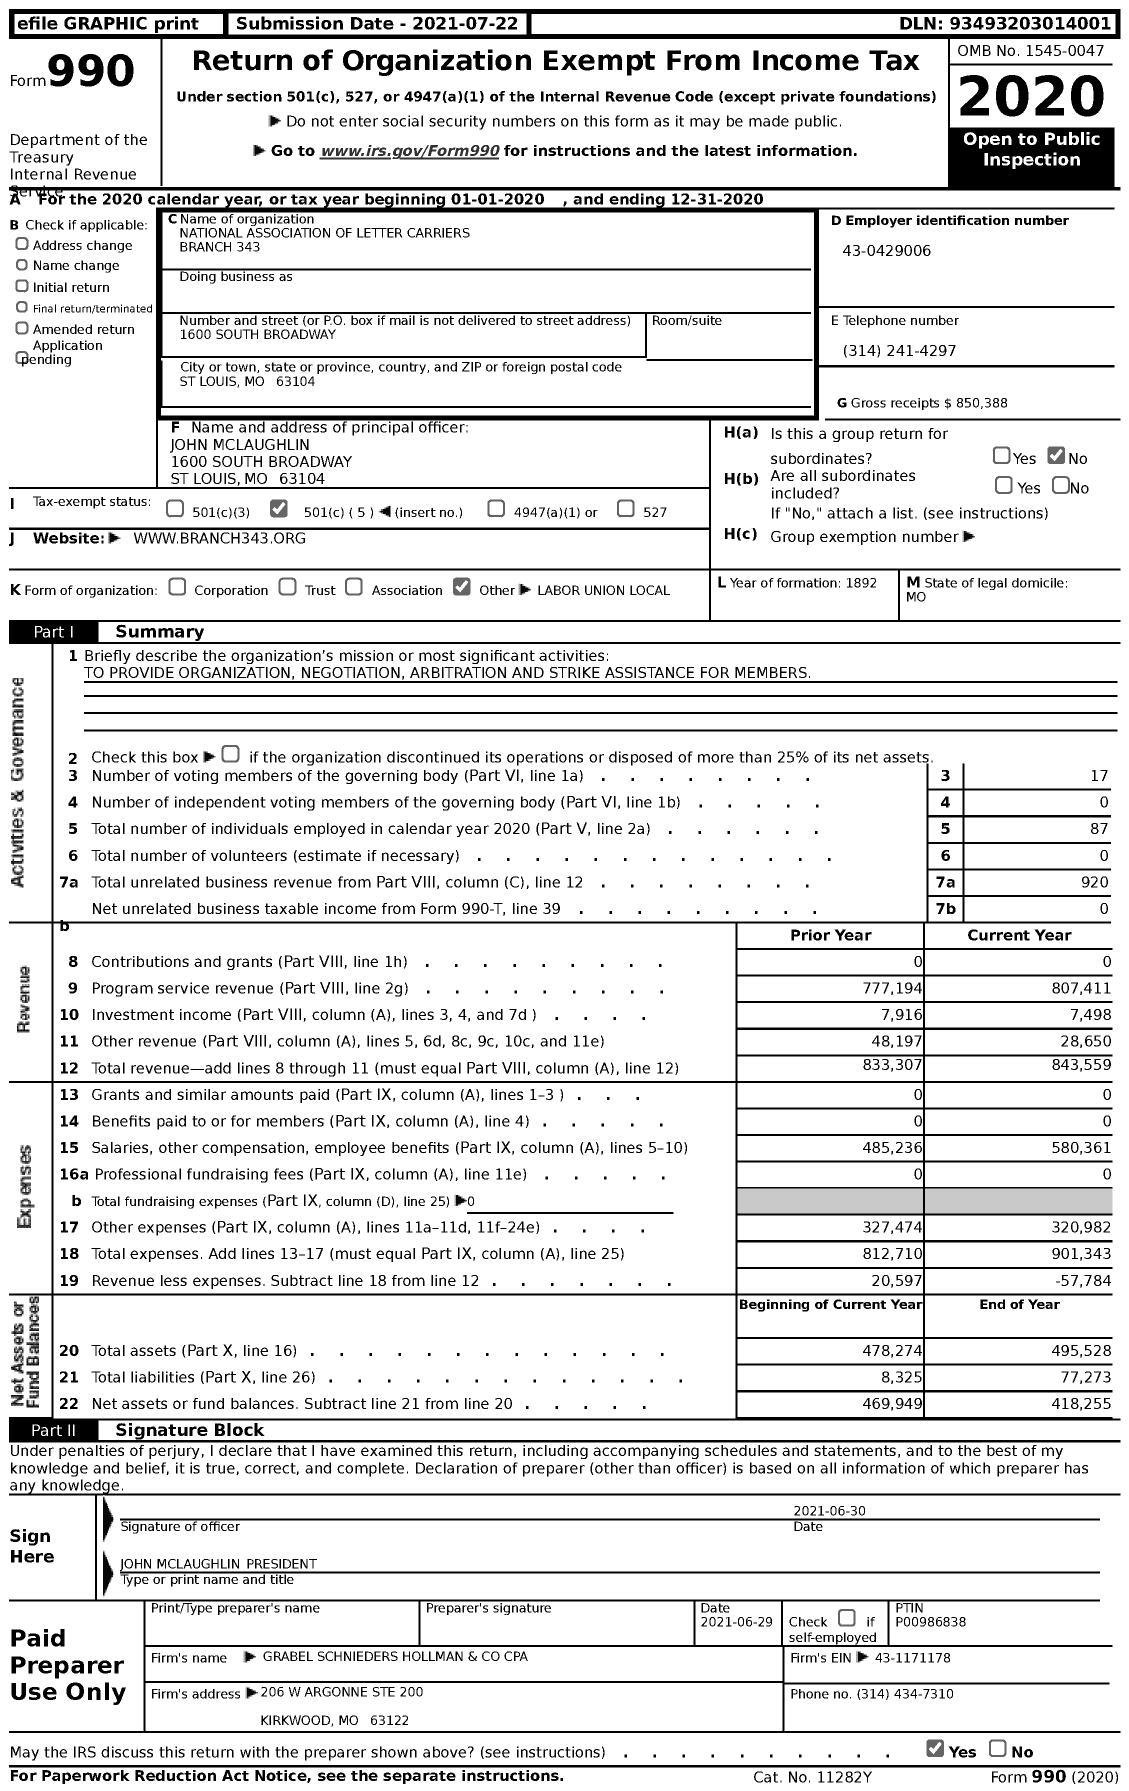 Image of first page of 2020 Form 990 for National Association of Letter Carriers Branch 343